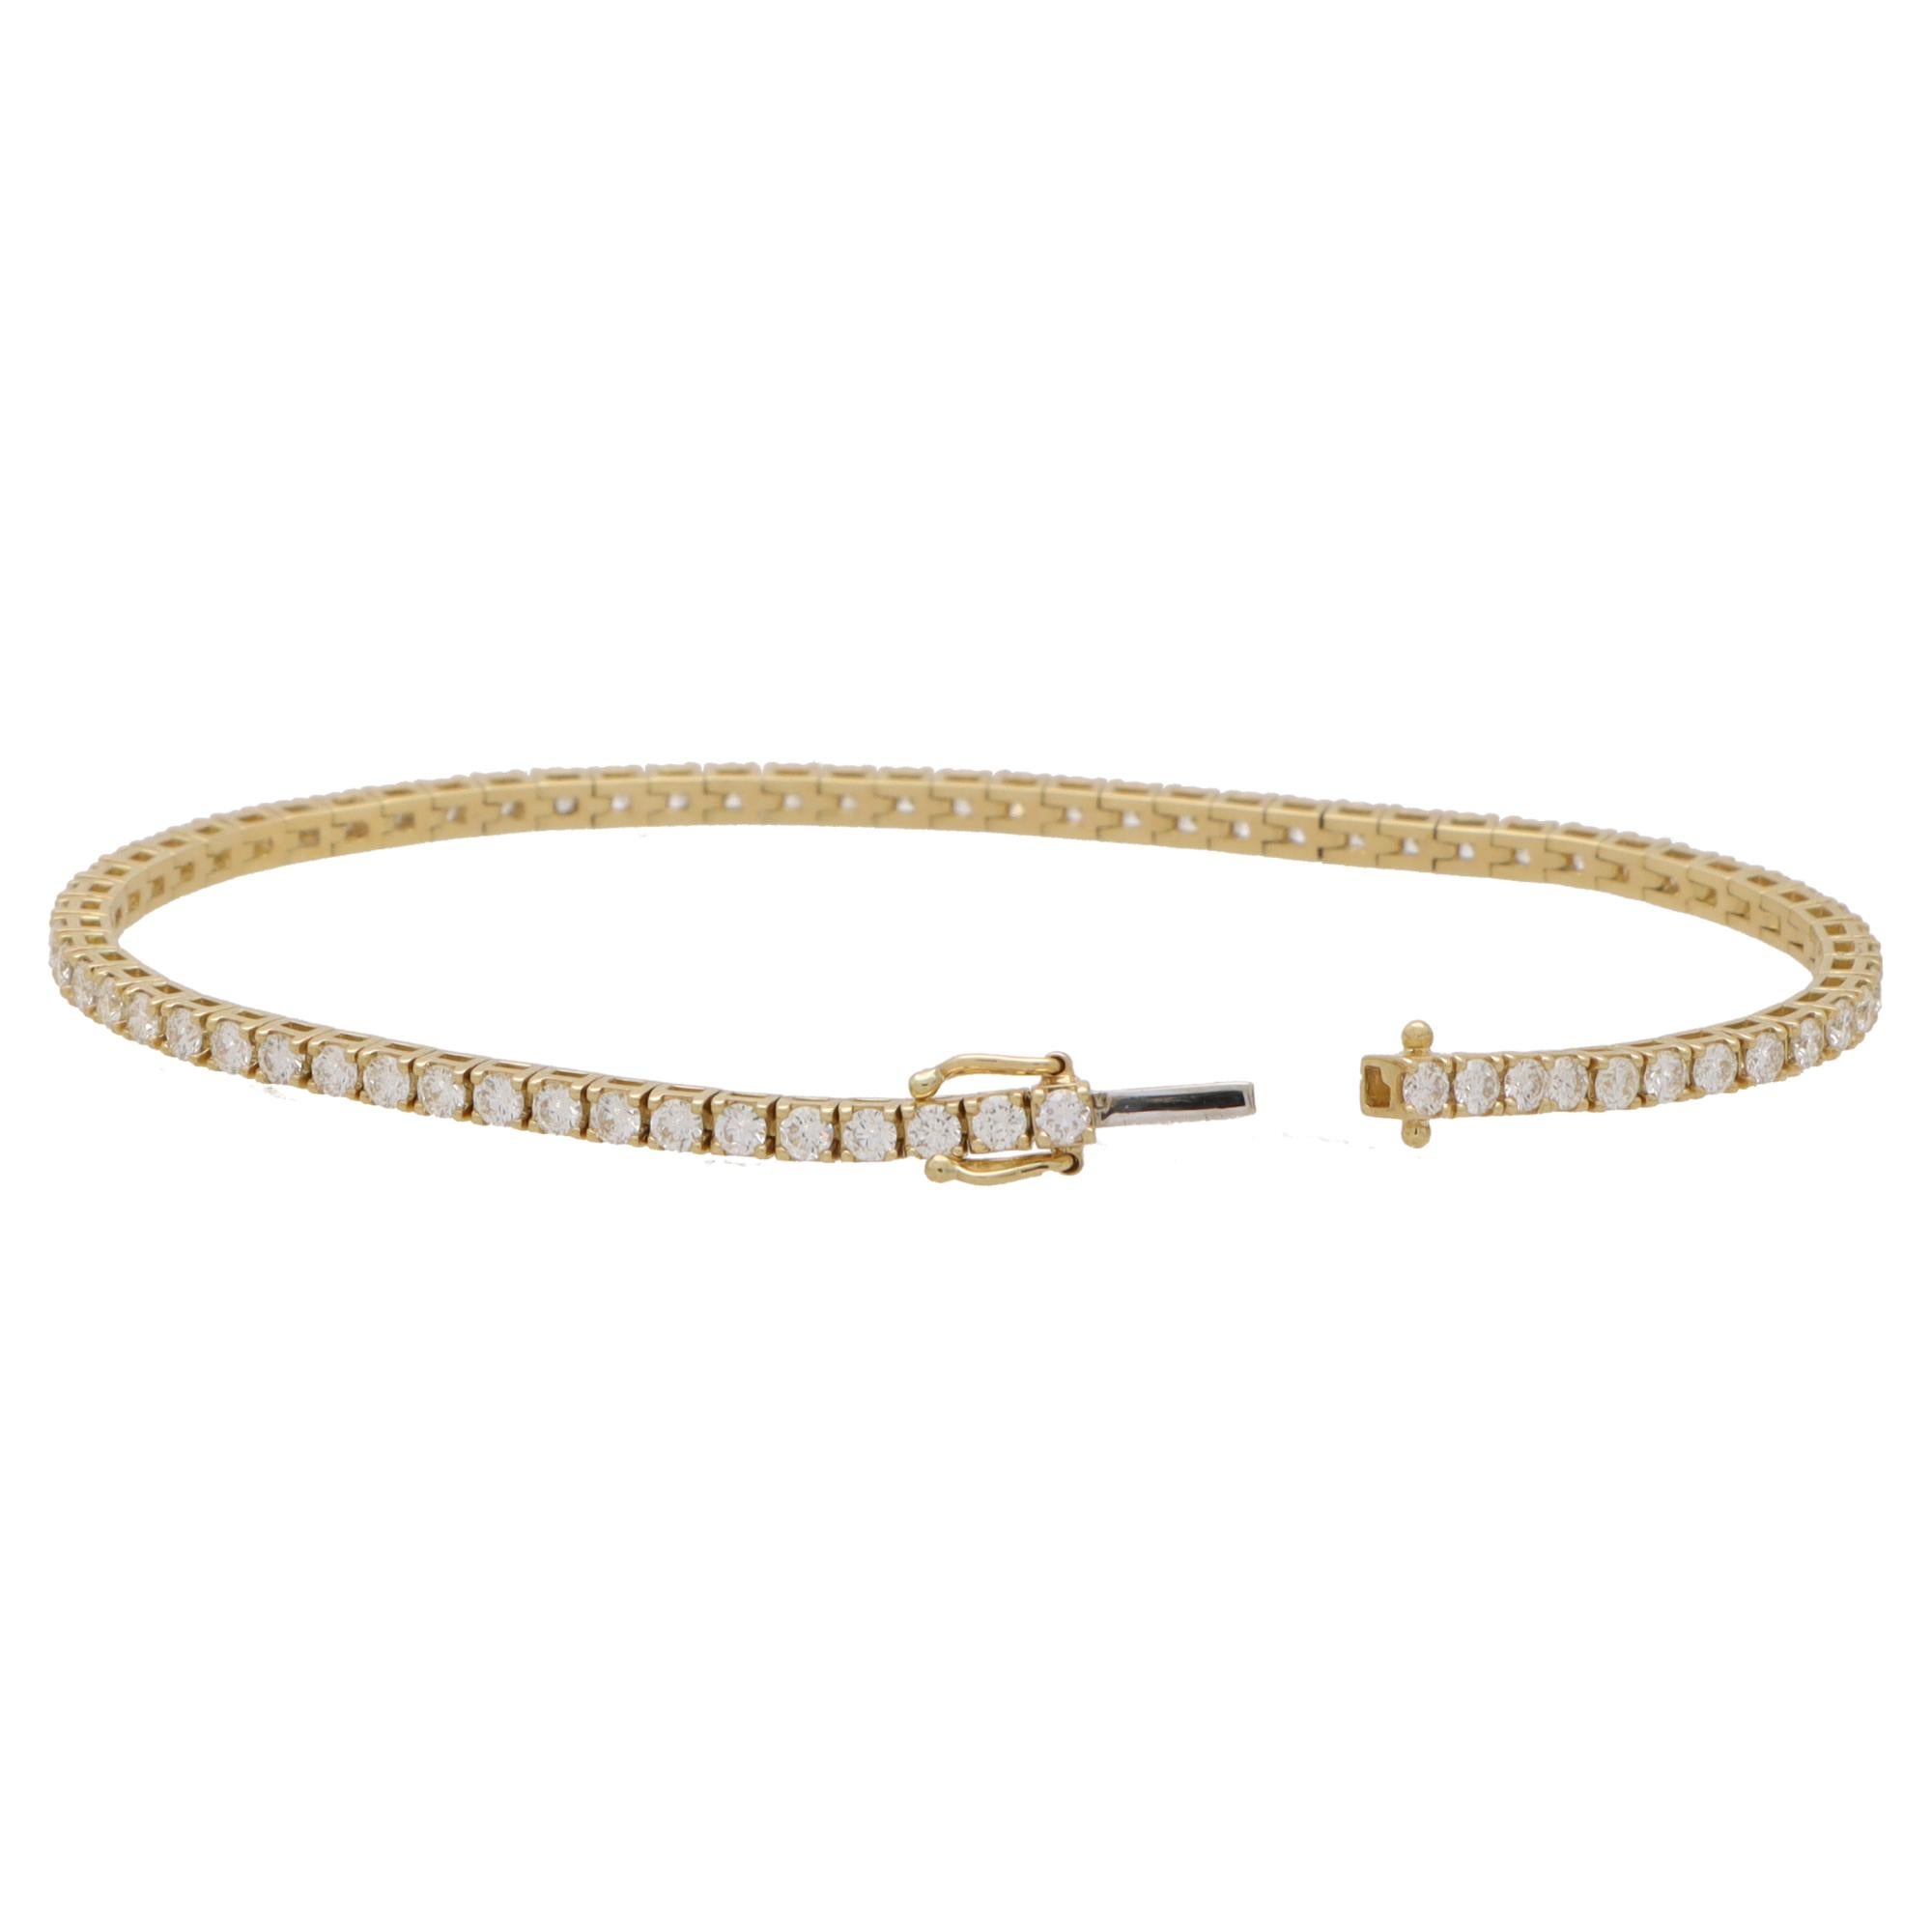  A sparkly contemporary diamond line bracelet set in 18k yellow gold.

The bracelet is composed of a grand total of 72 round brilliant cut diamonds, all of which are claw set securely.

Due to the links being articulated, this allows the bracelet to